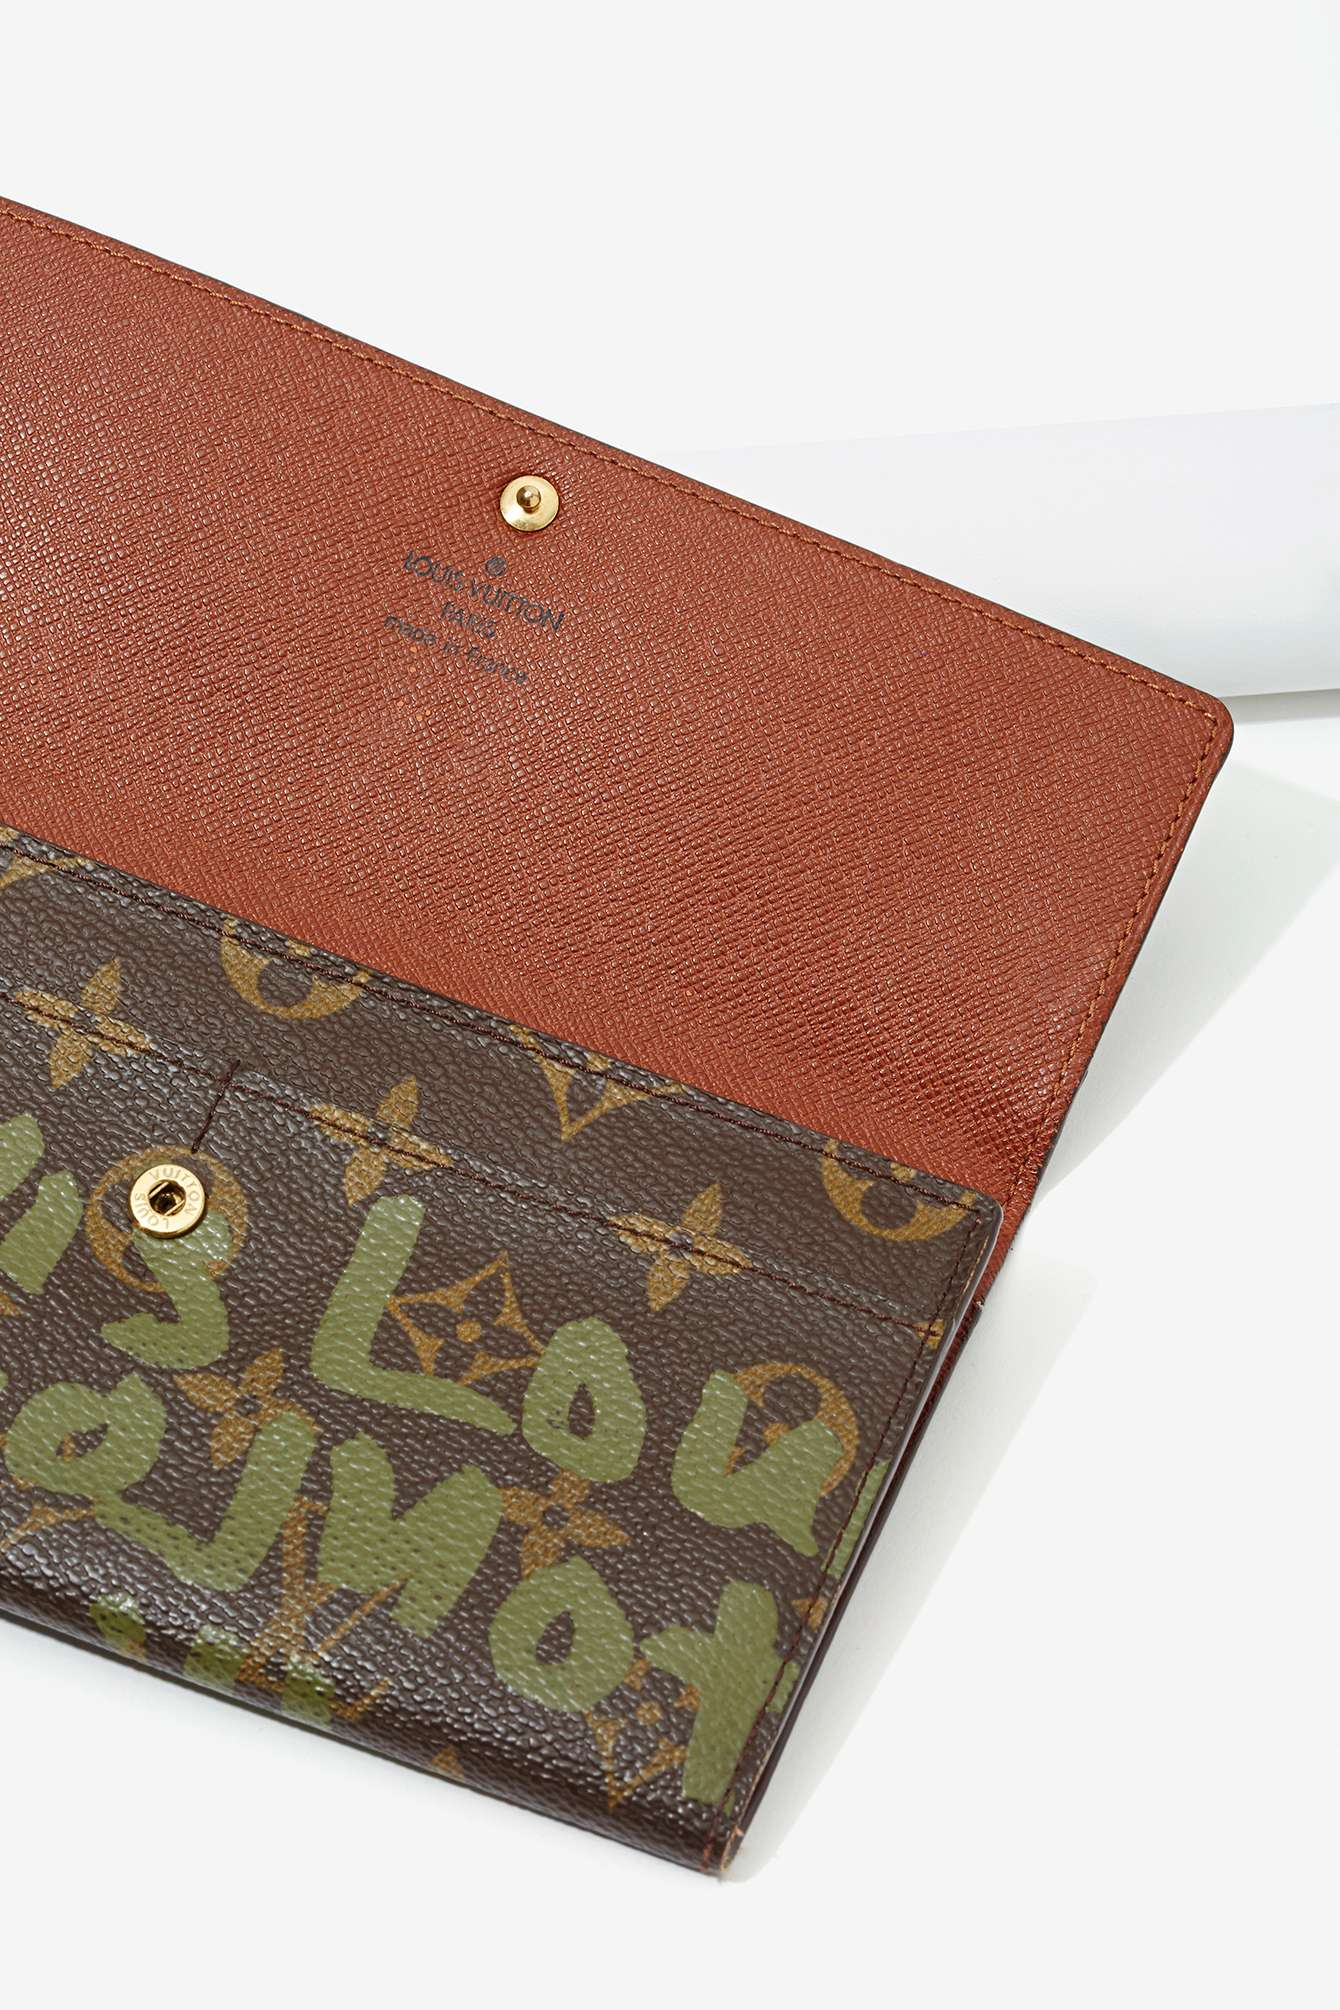 Louis Vuitton Leather Vintage Monogram Stephen Sprouse Wallet in Natural - Lyst